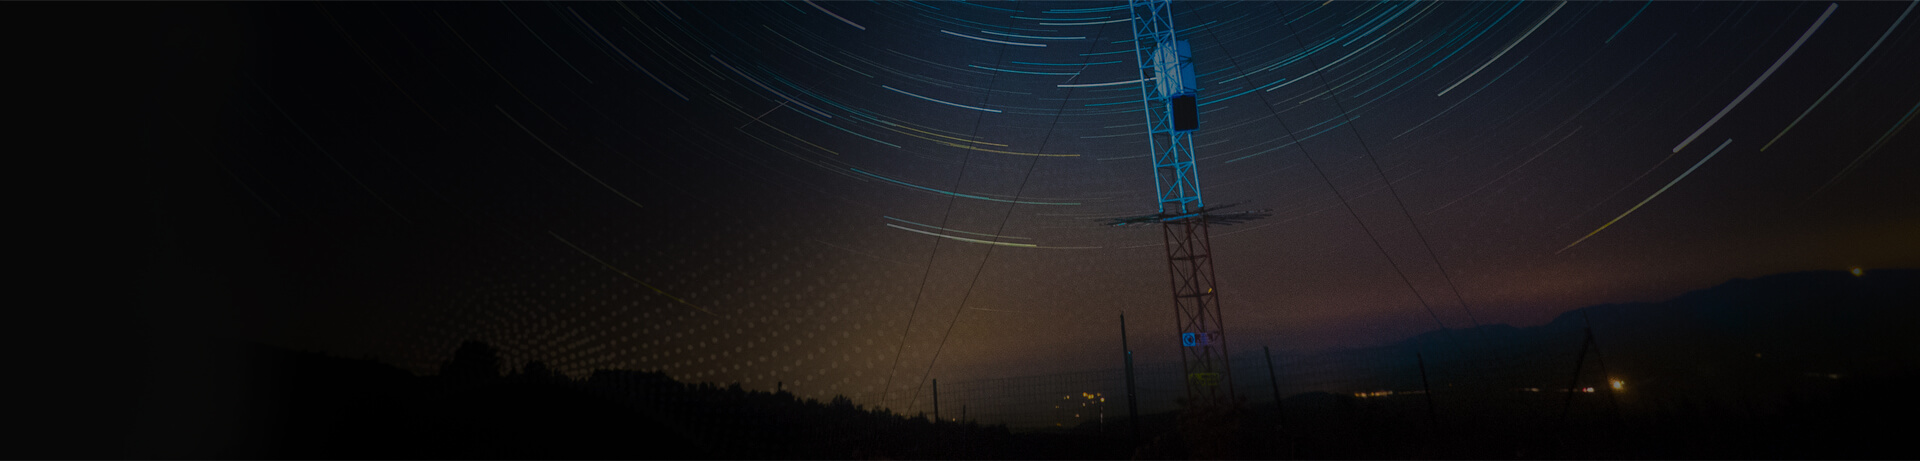 telecommunications solutions from barcodes, inc. radio tower at night